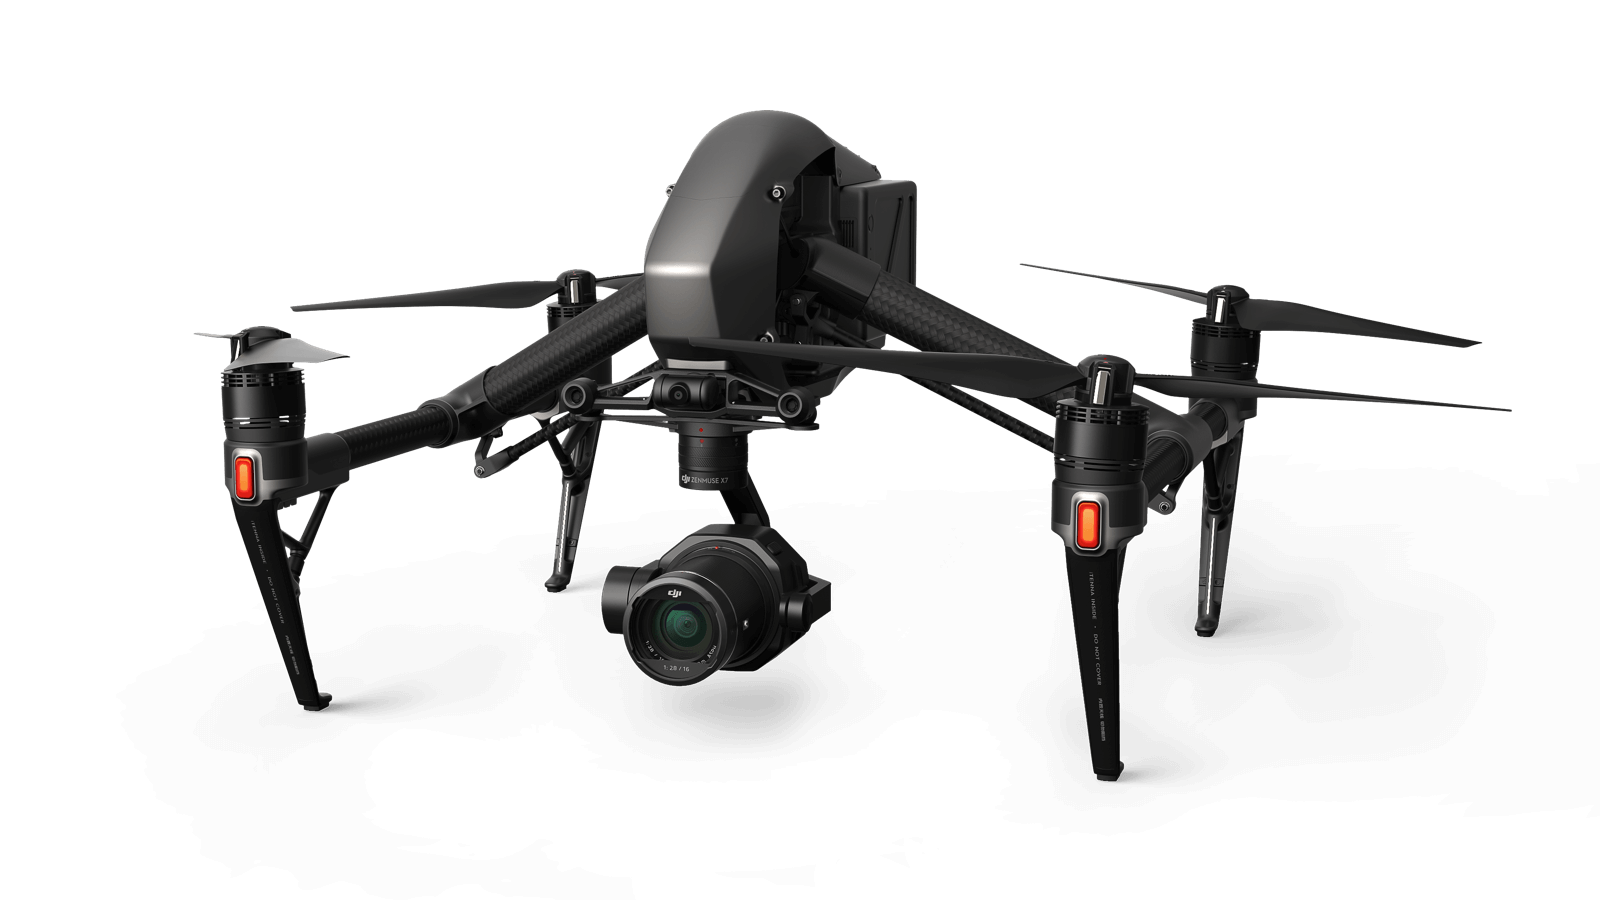 DJI launches Zenmuse X7 camera with interchangeable lenses